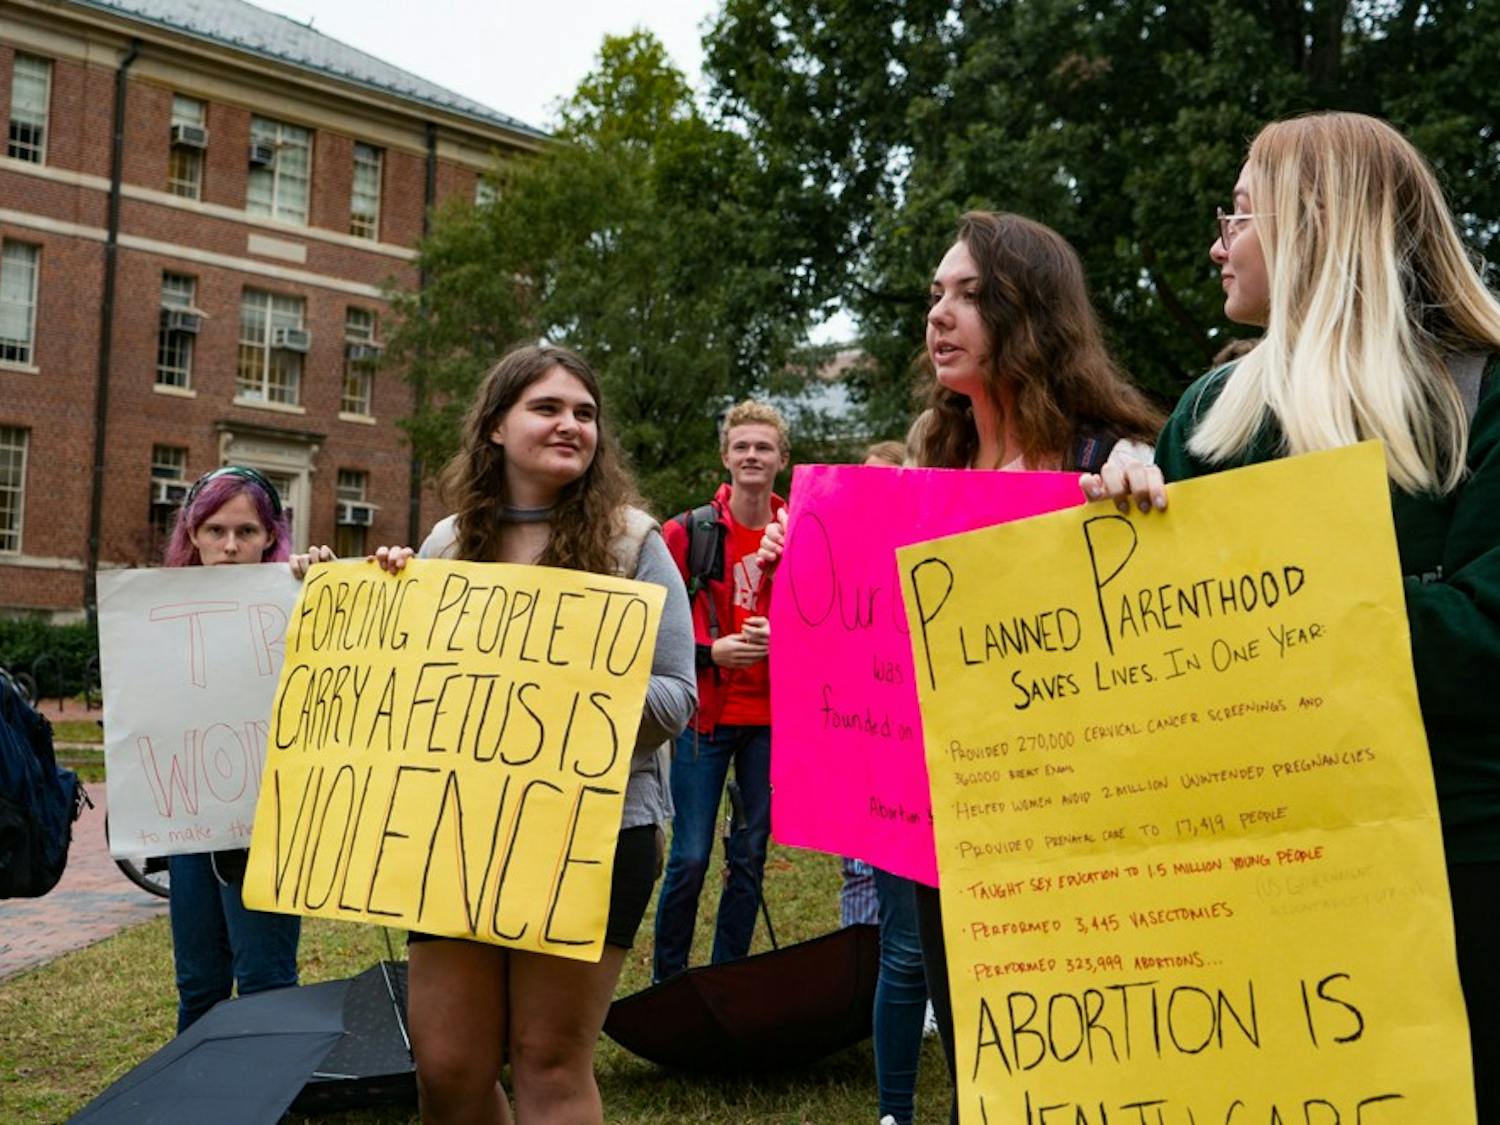 Students protest near the anti-abortion Genocide Awareness Project exhibit displayed at Polk Place on Tuesday Oct. 22, 2019. This exhibit included graphic images and made comparisons between abrotion procedures and mass genocides.